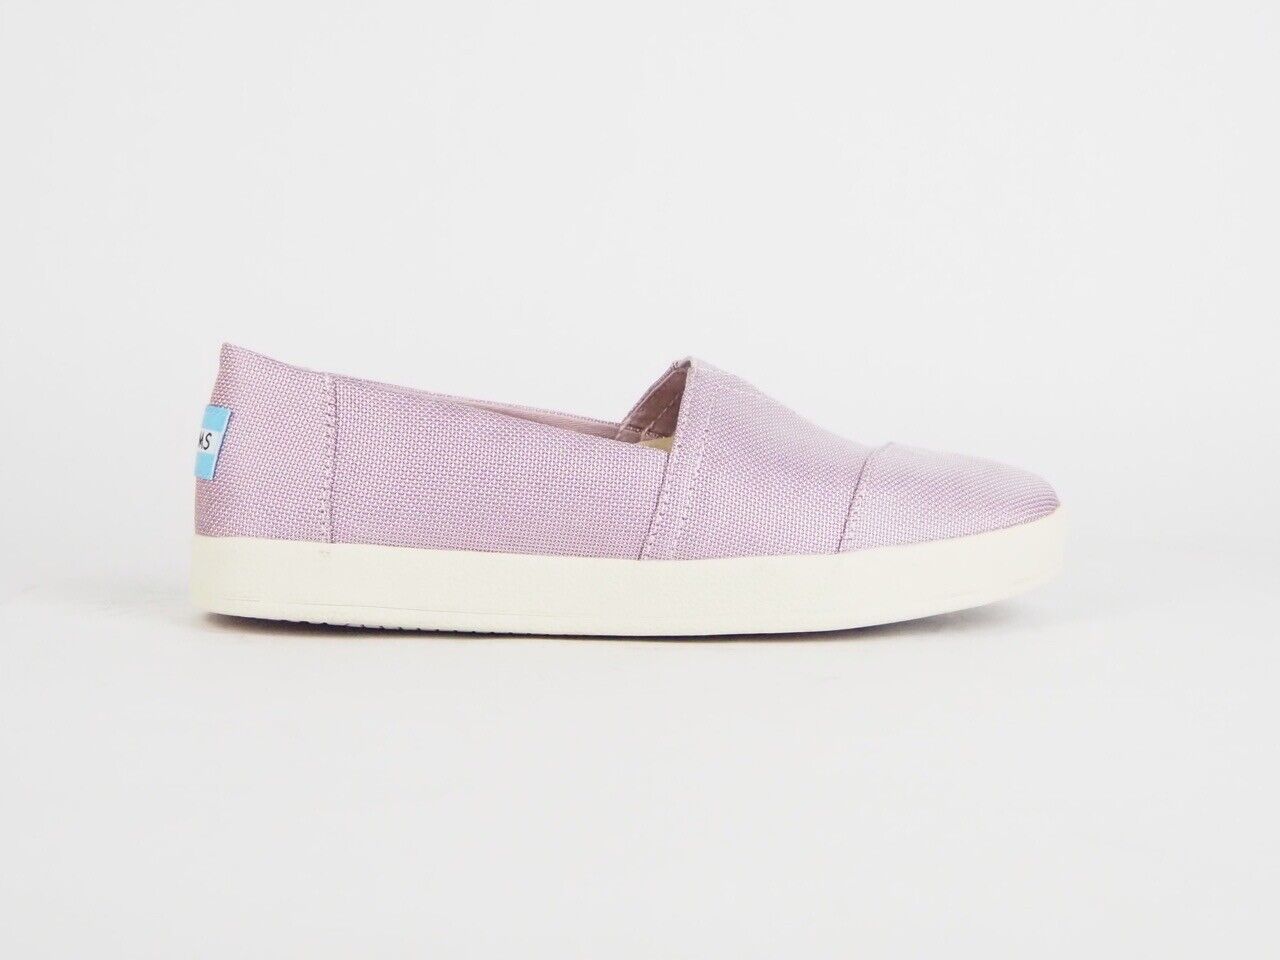 Toms Avalon Burnished Lilac Shiny Woven Slip On Trainers – Top